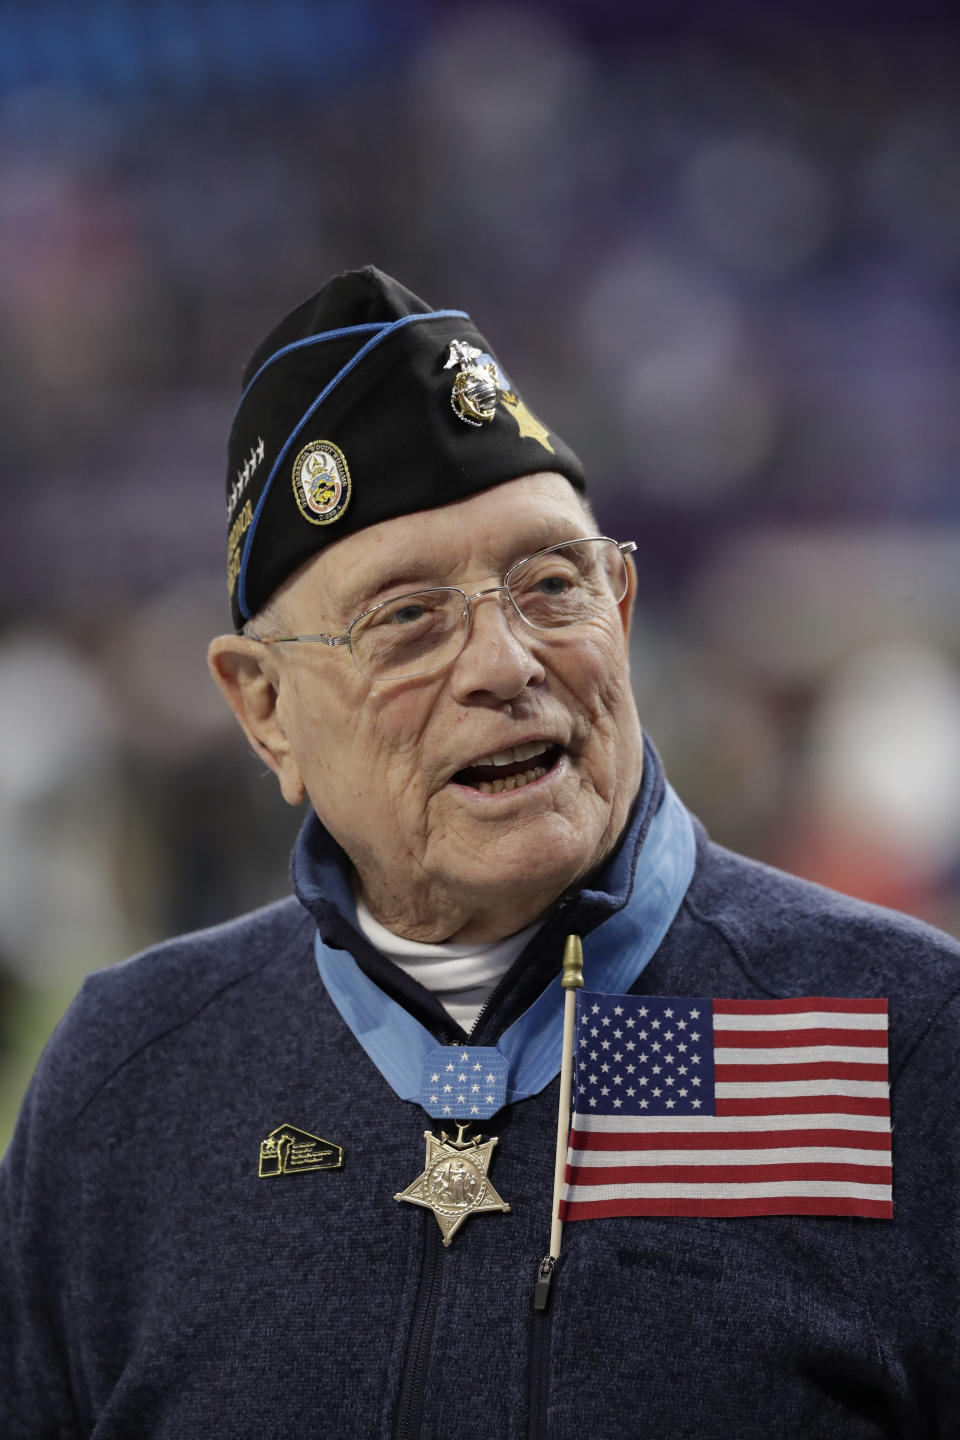 <p>Woody Williams, 94, the only living Marine Medal of Honor recipient from World War II, gets ready to assist with the coin toss. He earned the award for his bravery in the battle of Iwo Jima. (AP Photo/Tony Gutierrez) </p>